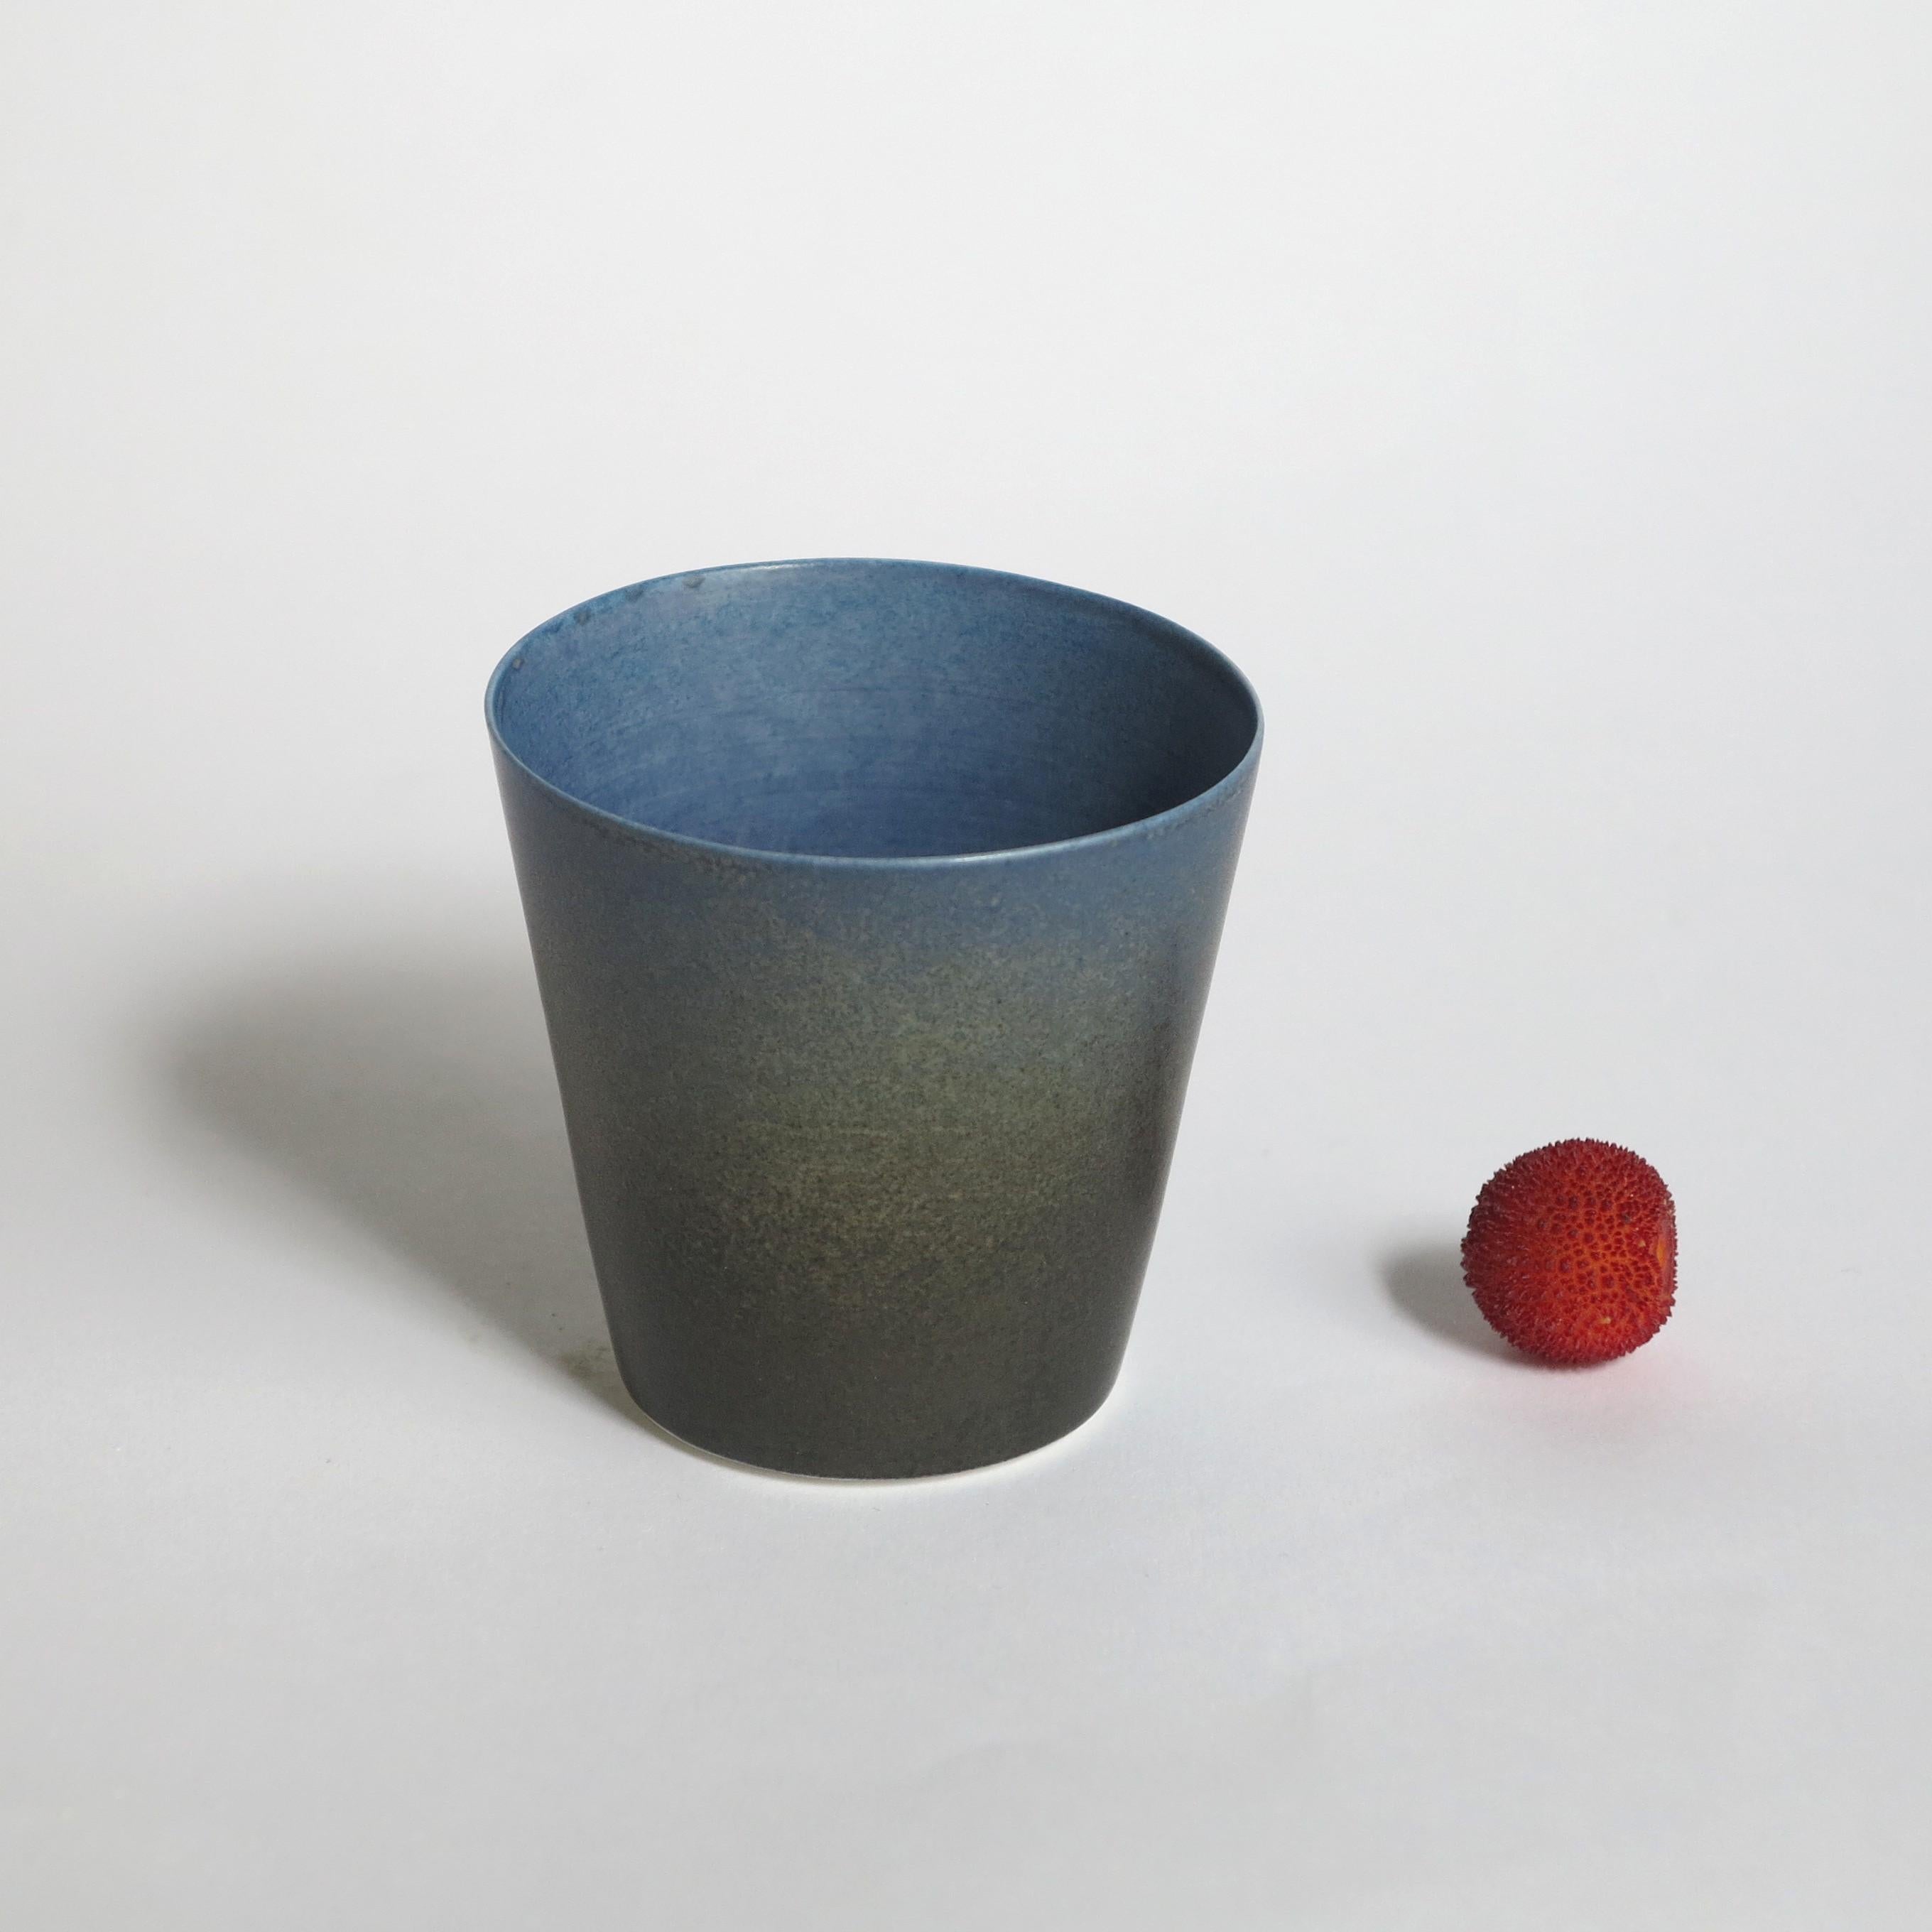 Set of 4 porcelain blue coffee cups by Cica Gomez
Price for set of 4.
Dimensions: Ø 6.5 x H 6 cm
Materials: porcelain

Usual objects. My work is first driven by the search for the line. The one that it draw when the object takes shape and place